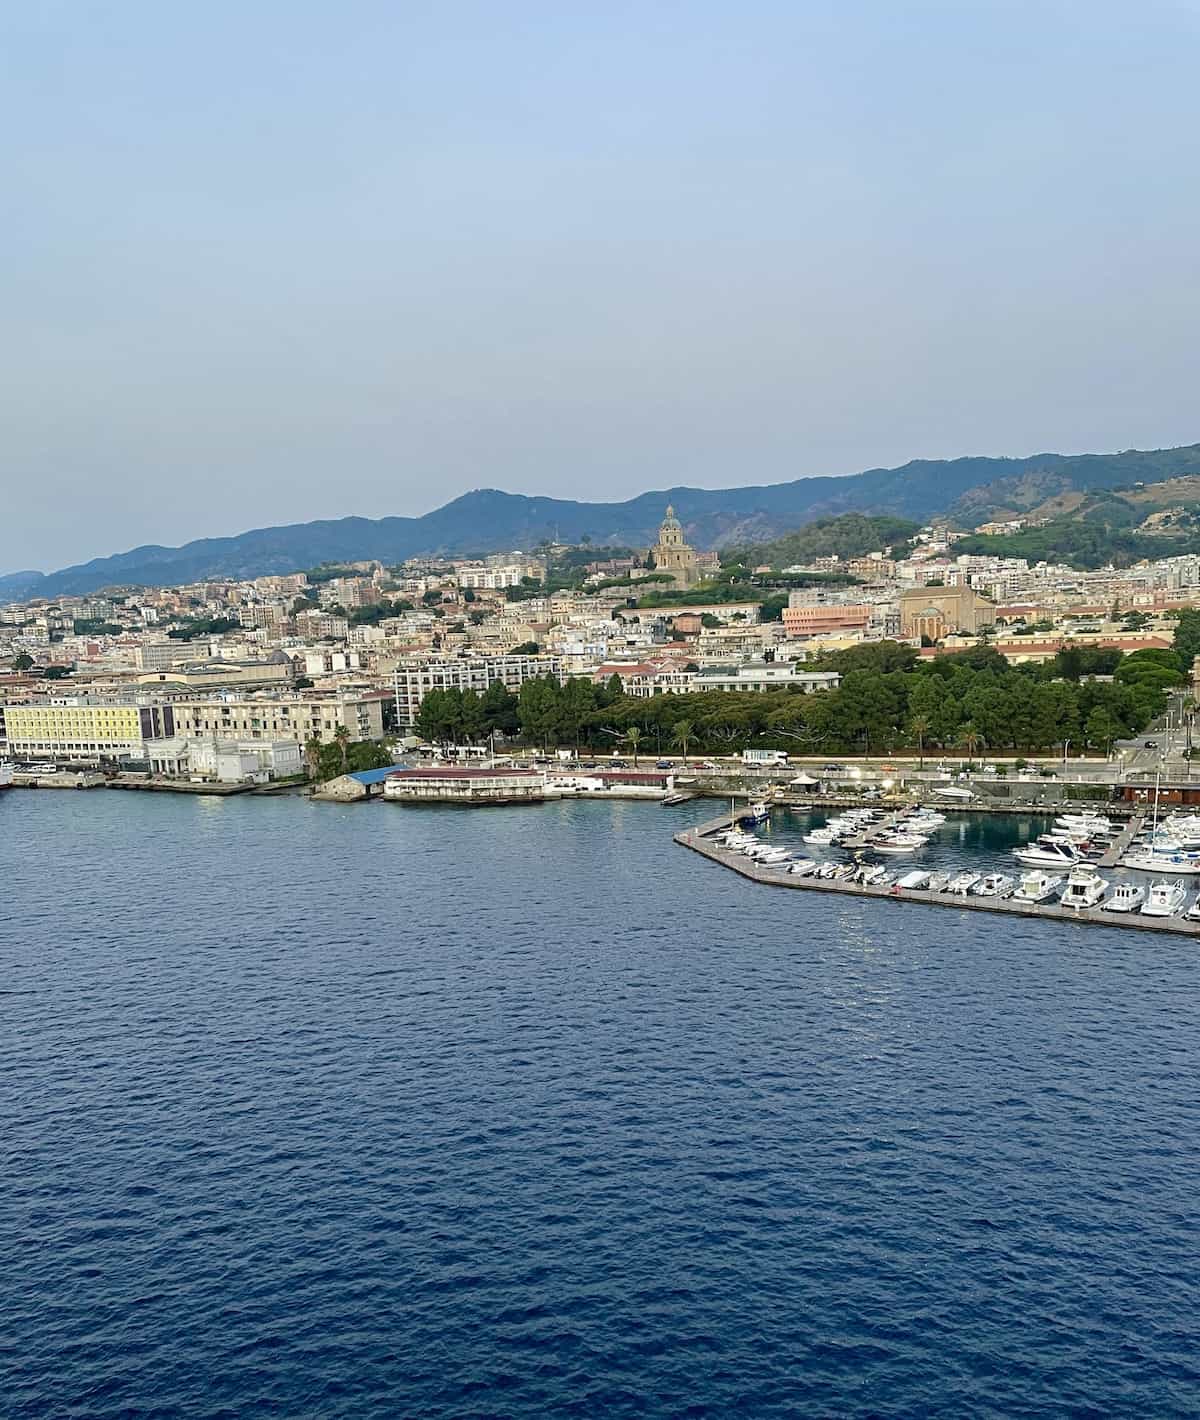 View of Messina Italy from a cruise ship.